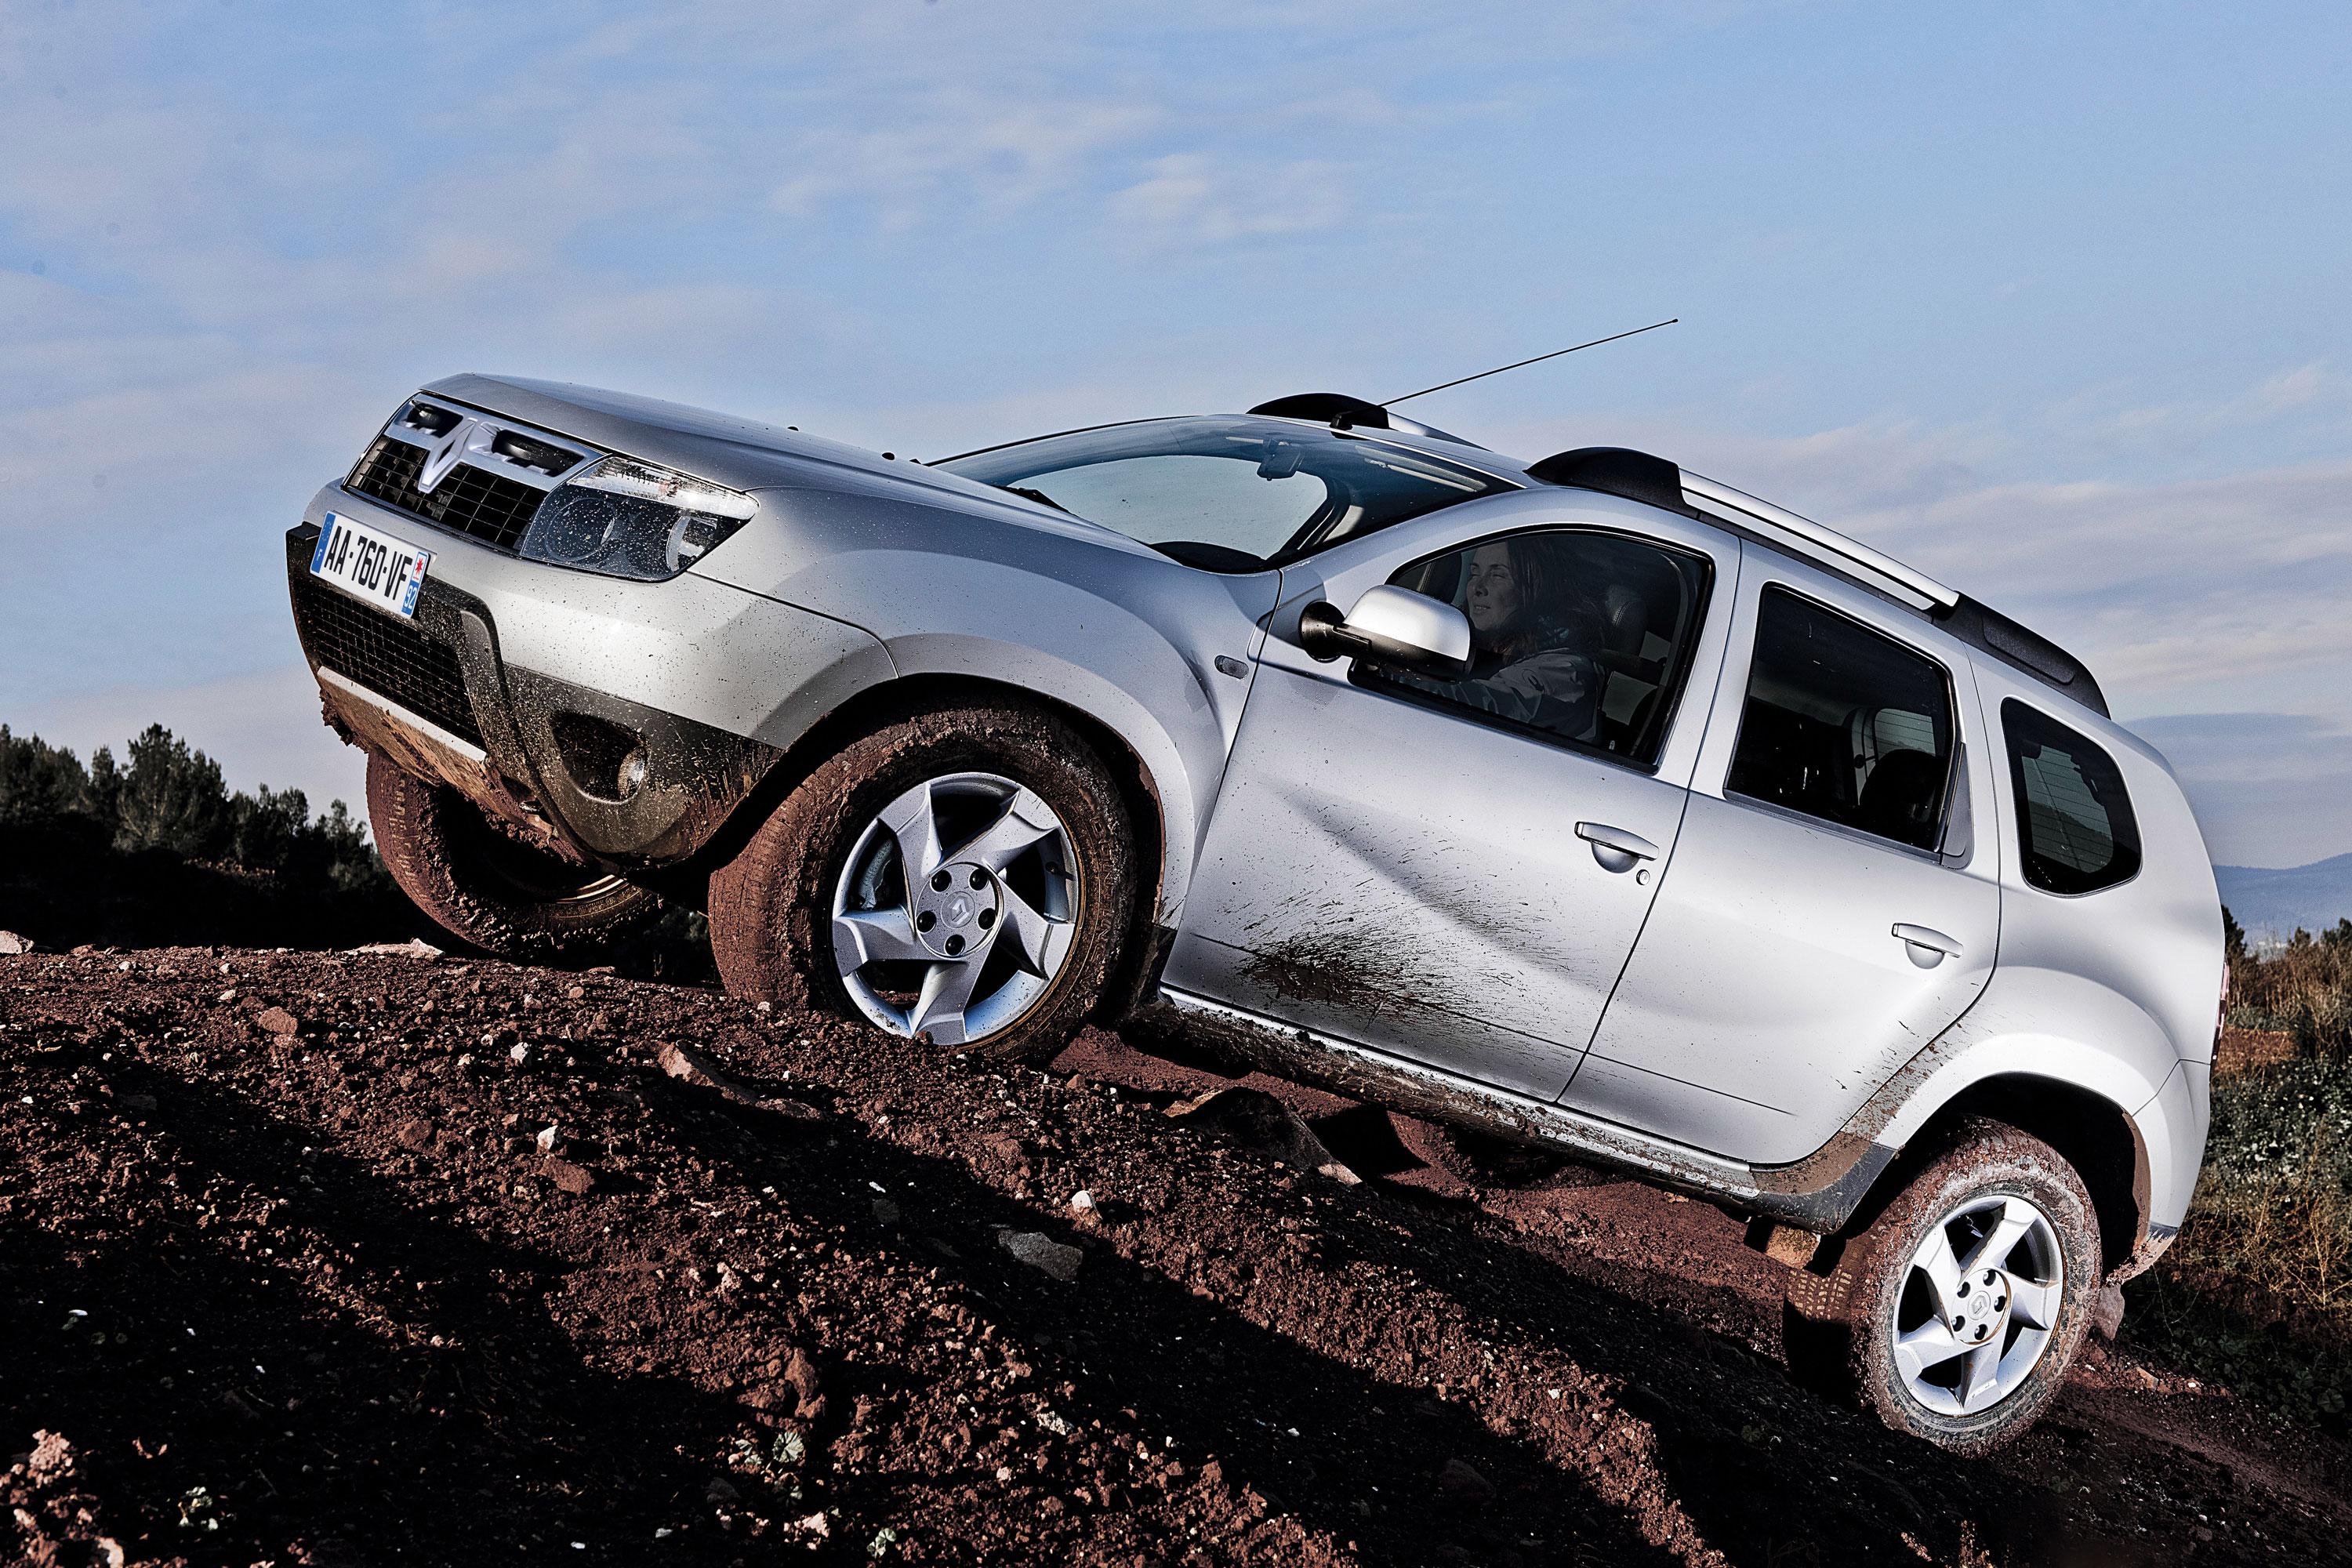 Дастер 4wd 2.0. Renault Duster 1. Renault Duster 2000. Рено Дастер 2011. Рено Дастер 1.6.